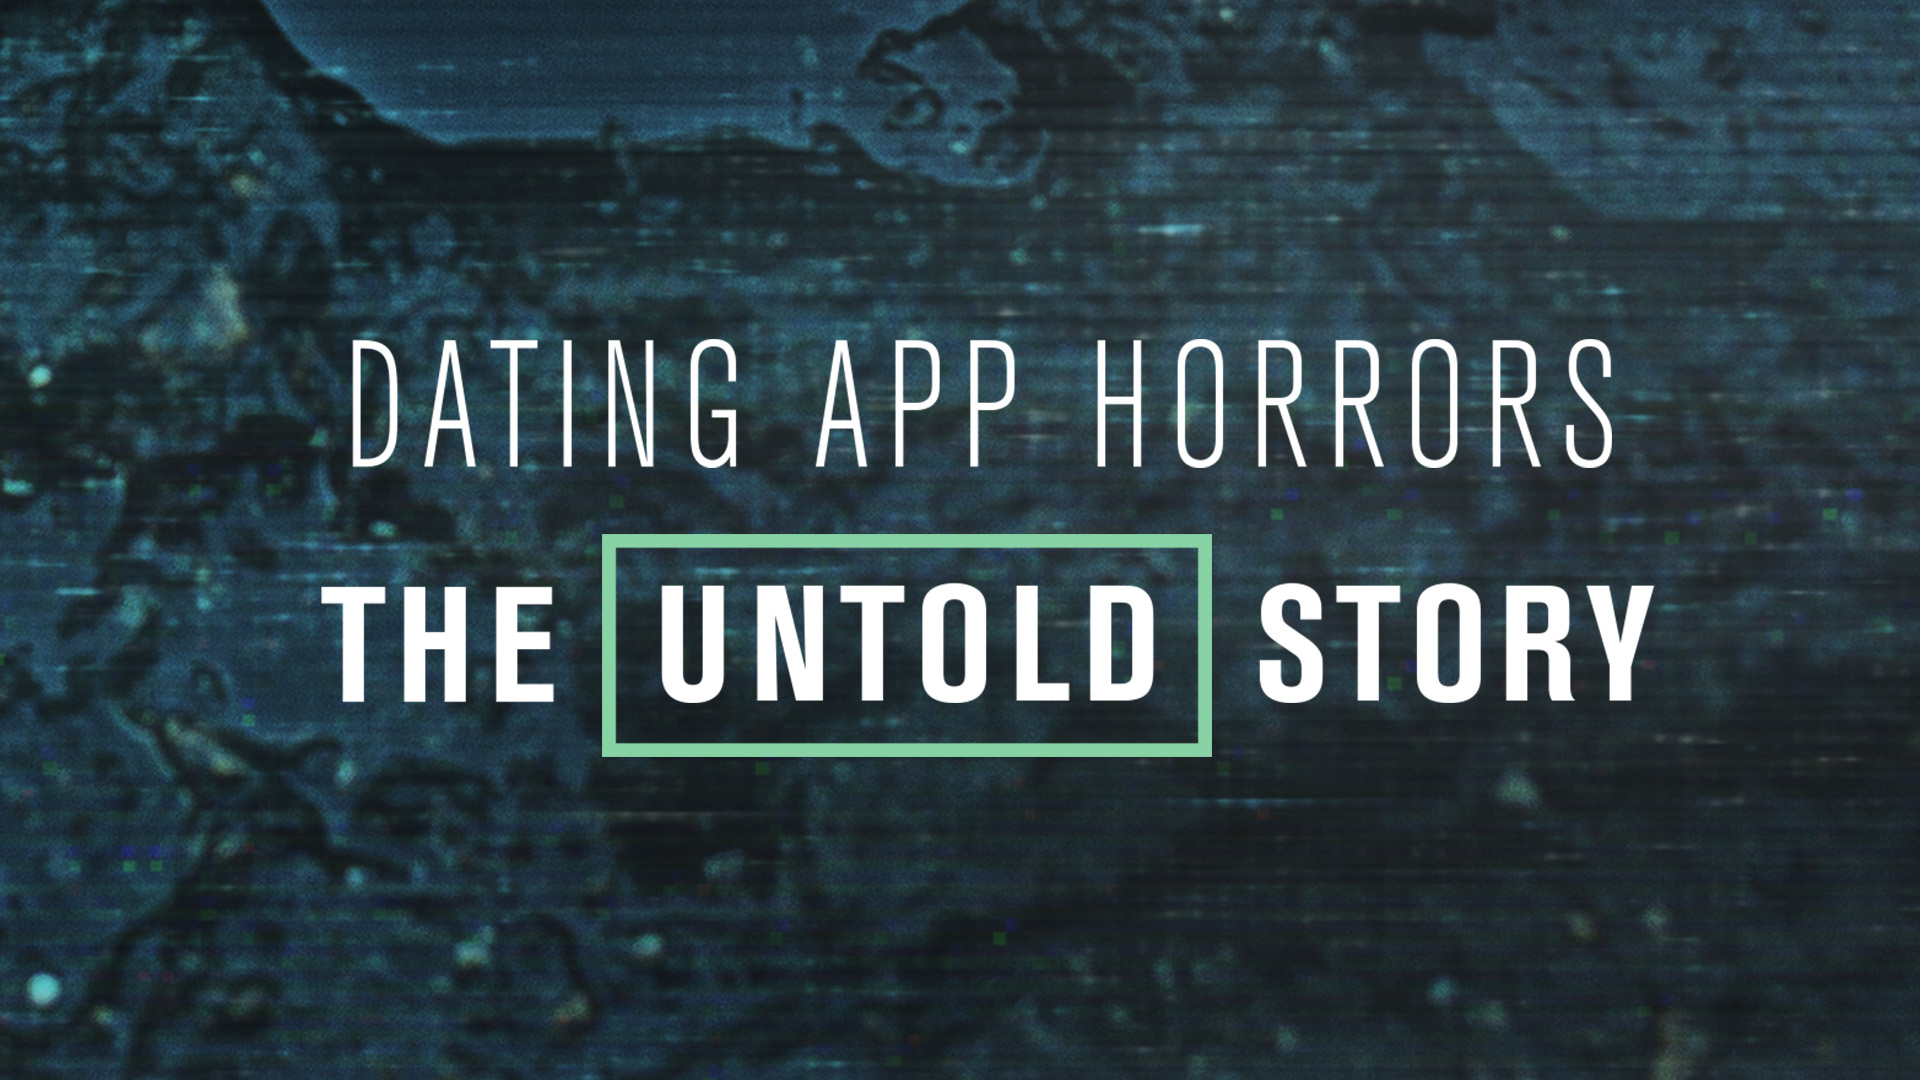 Dating App Horrors: The Untold Story